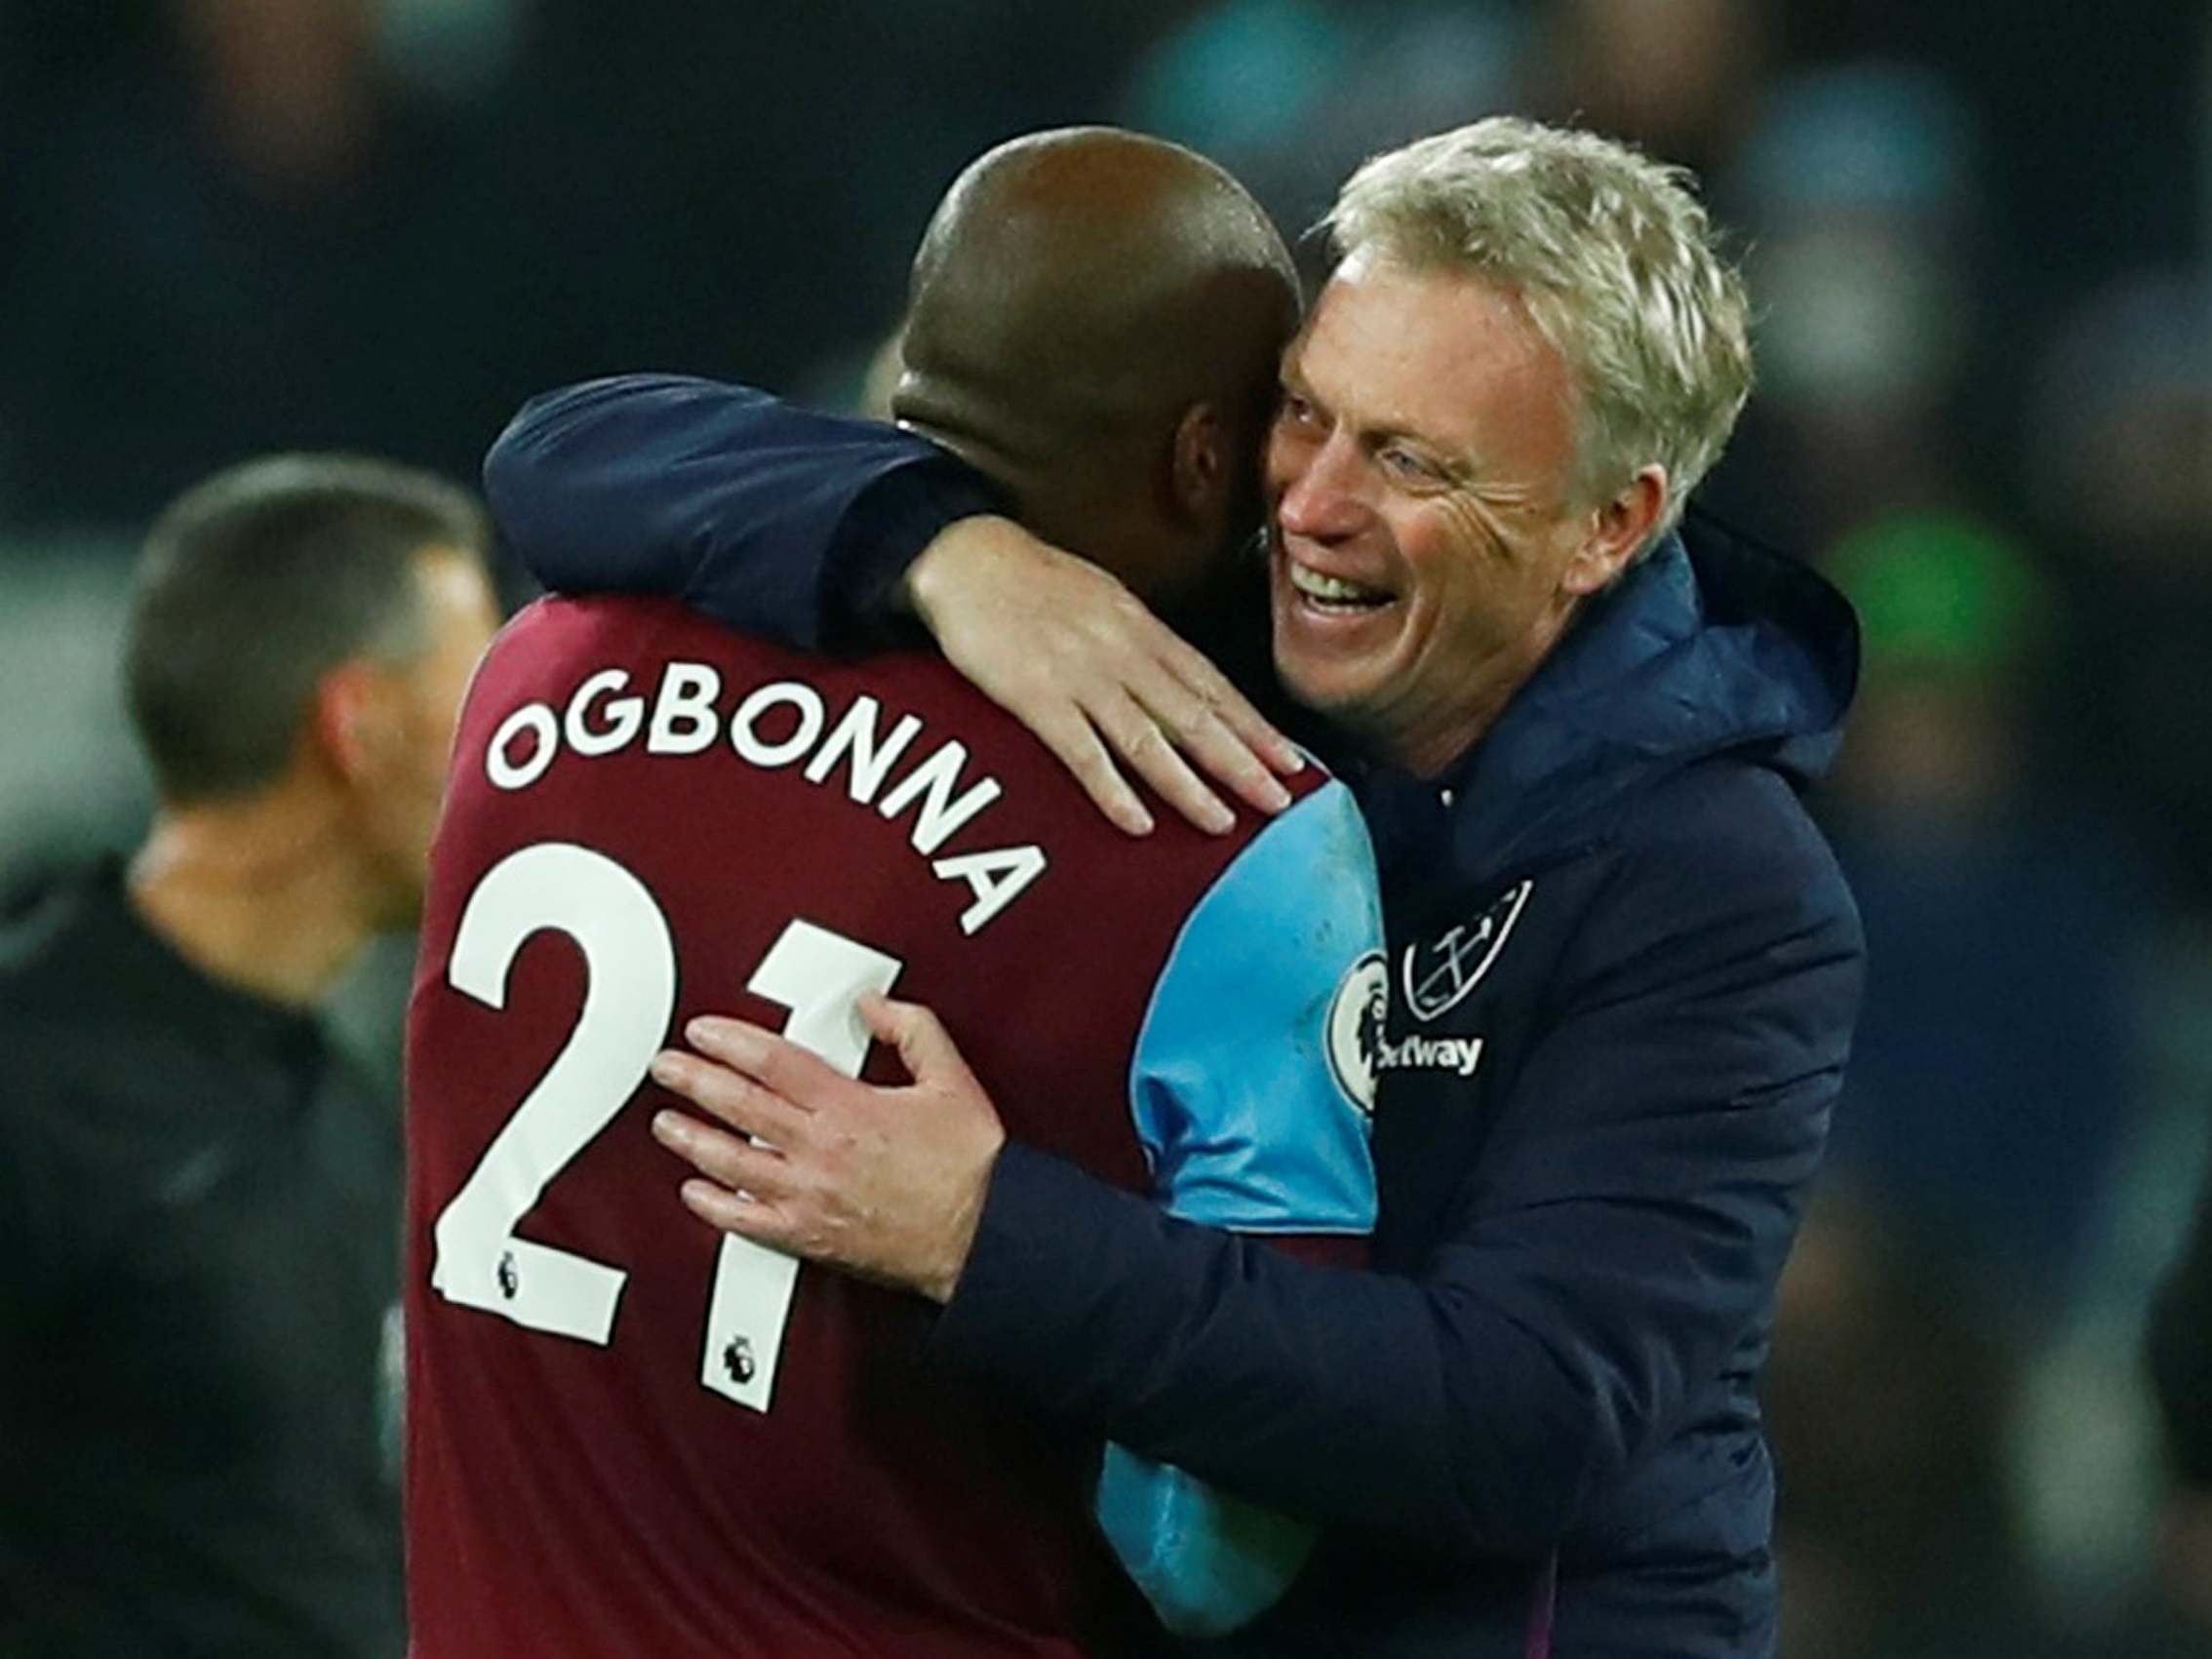 West Ham vs Bournemouth result: David Moyes' steady hand guides Hammers to heavy win